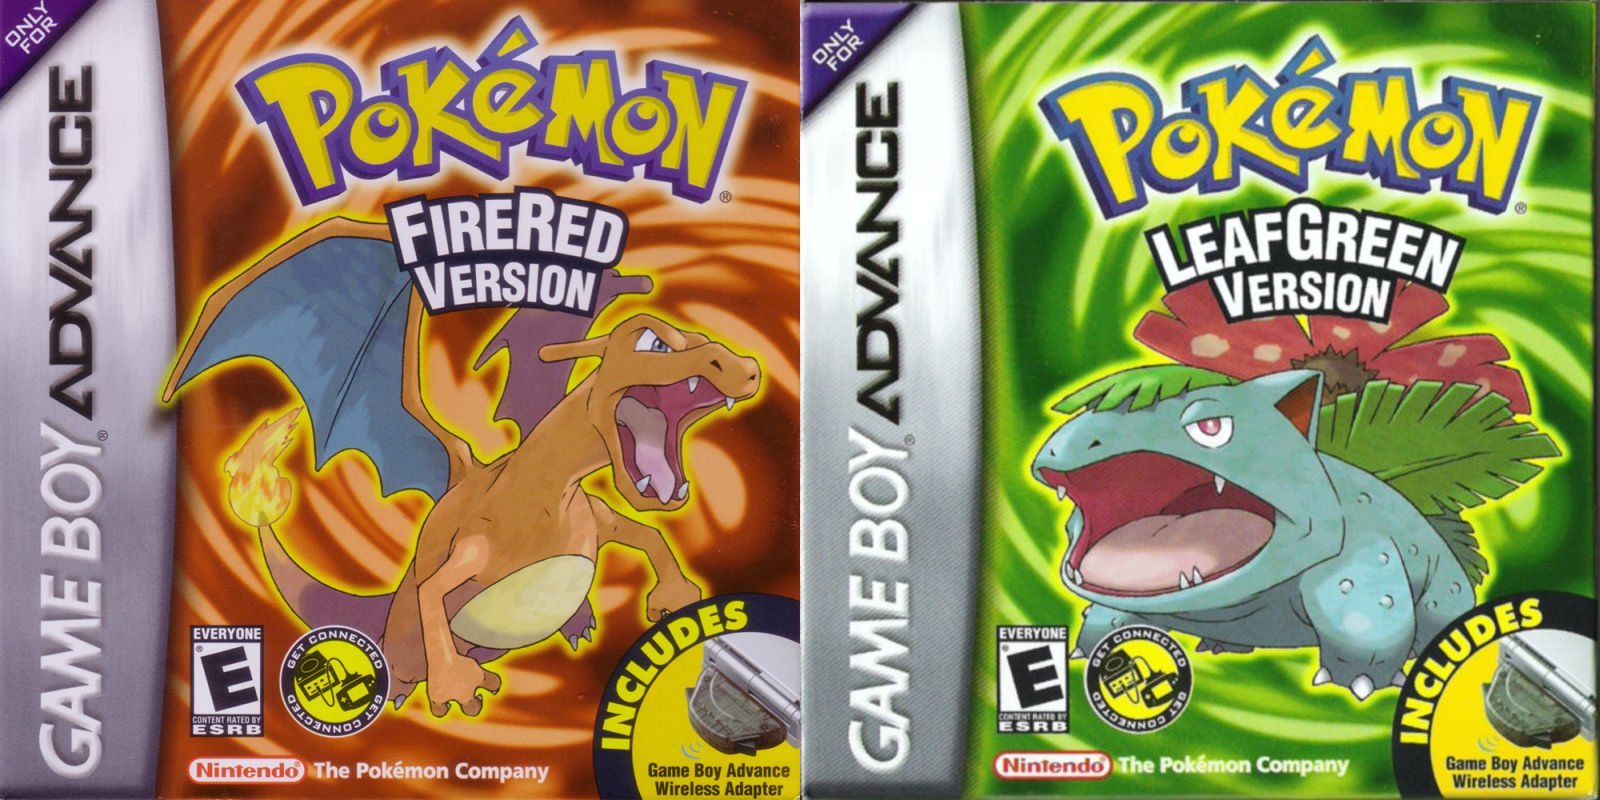 Pokémon Fire Red and Leaf Green